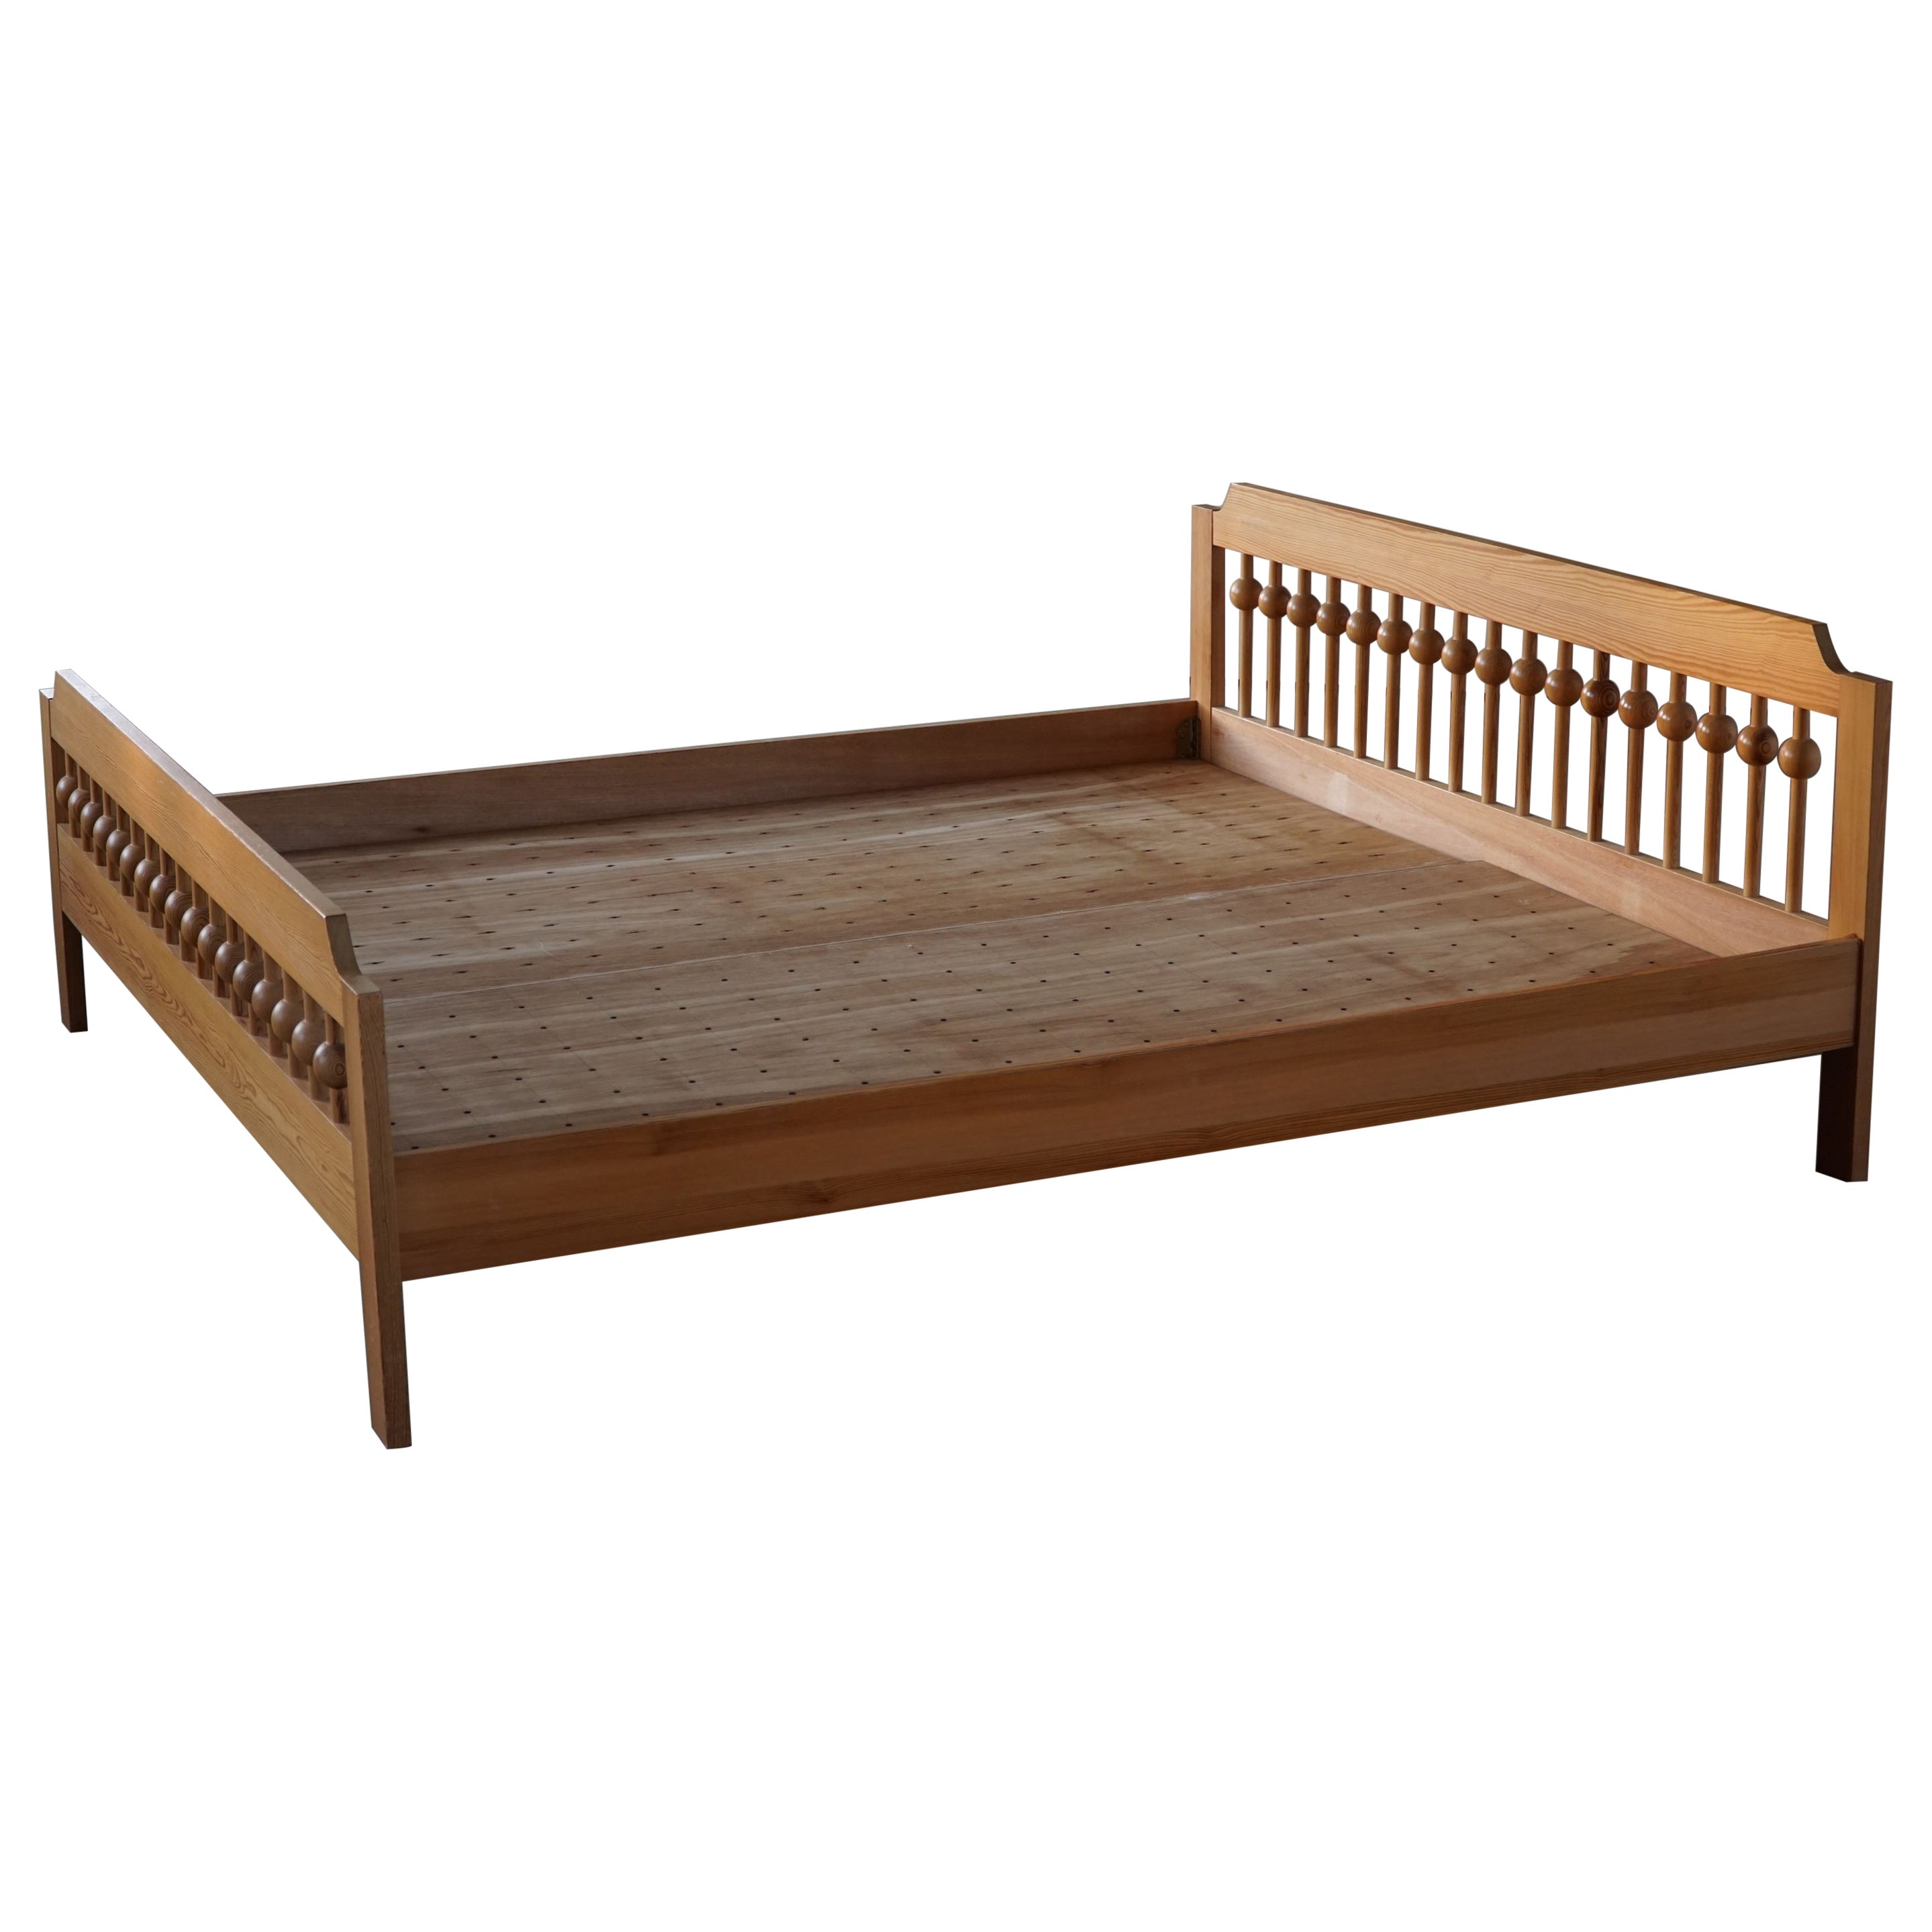 Swedish Modern Sculptural Bed in Pine, Made by Sven Larsson, 1960s For Sale